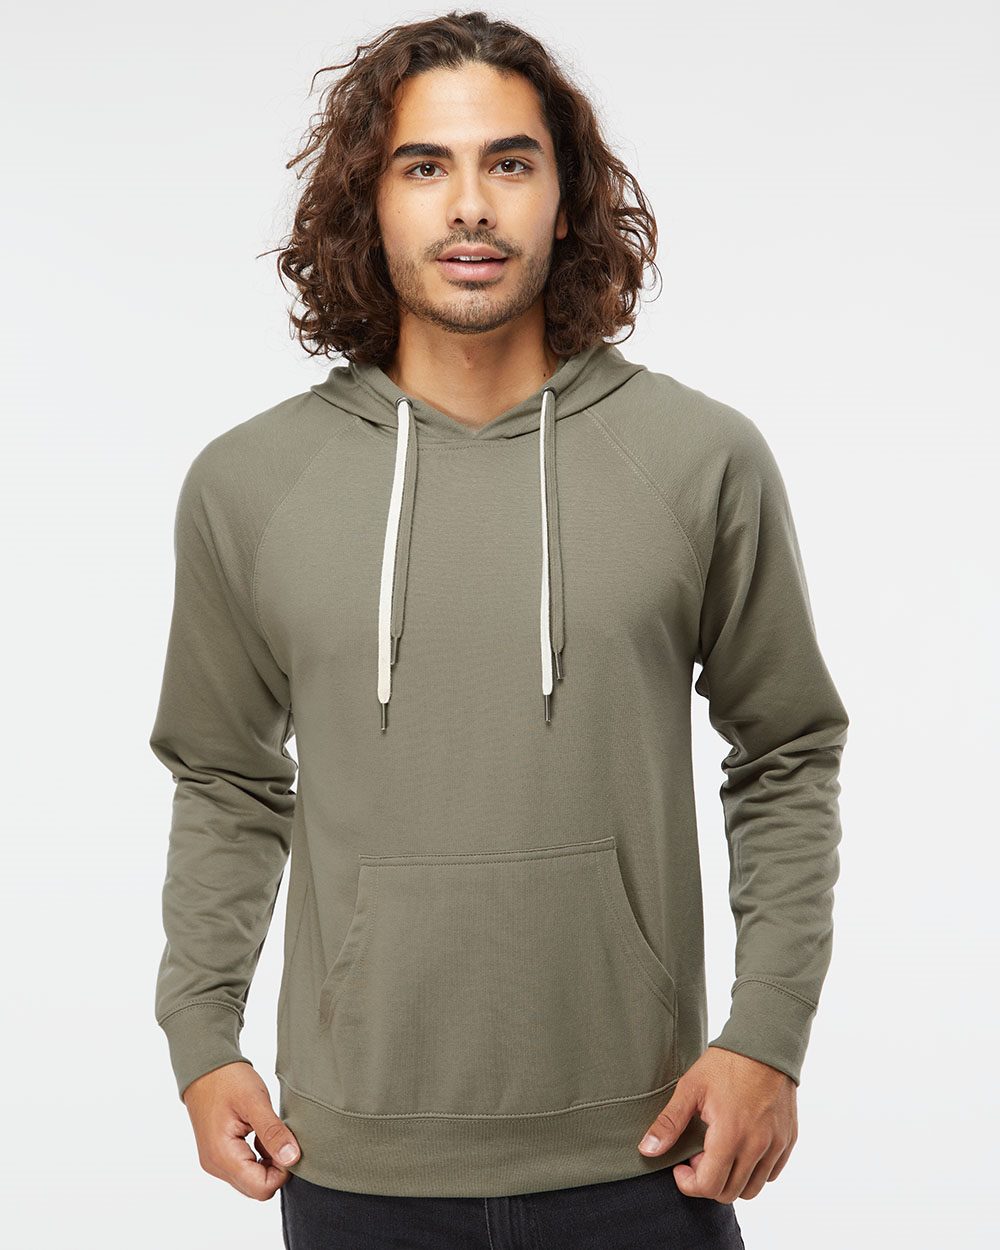 SS1000 Trading - Loopback Terry Co. Independent Lightweight Sweatshirt Hooded Icon